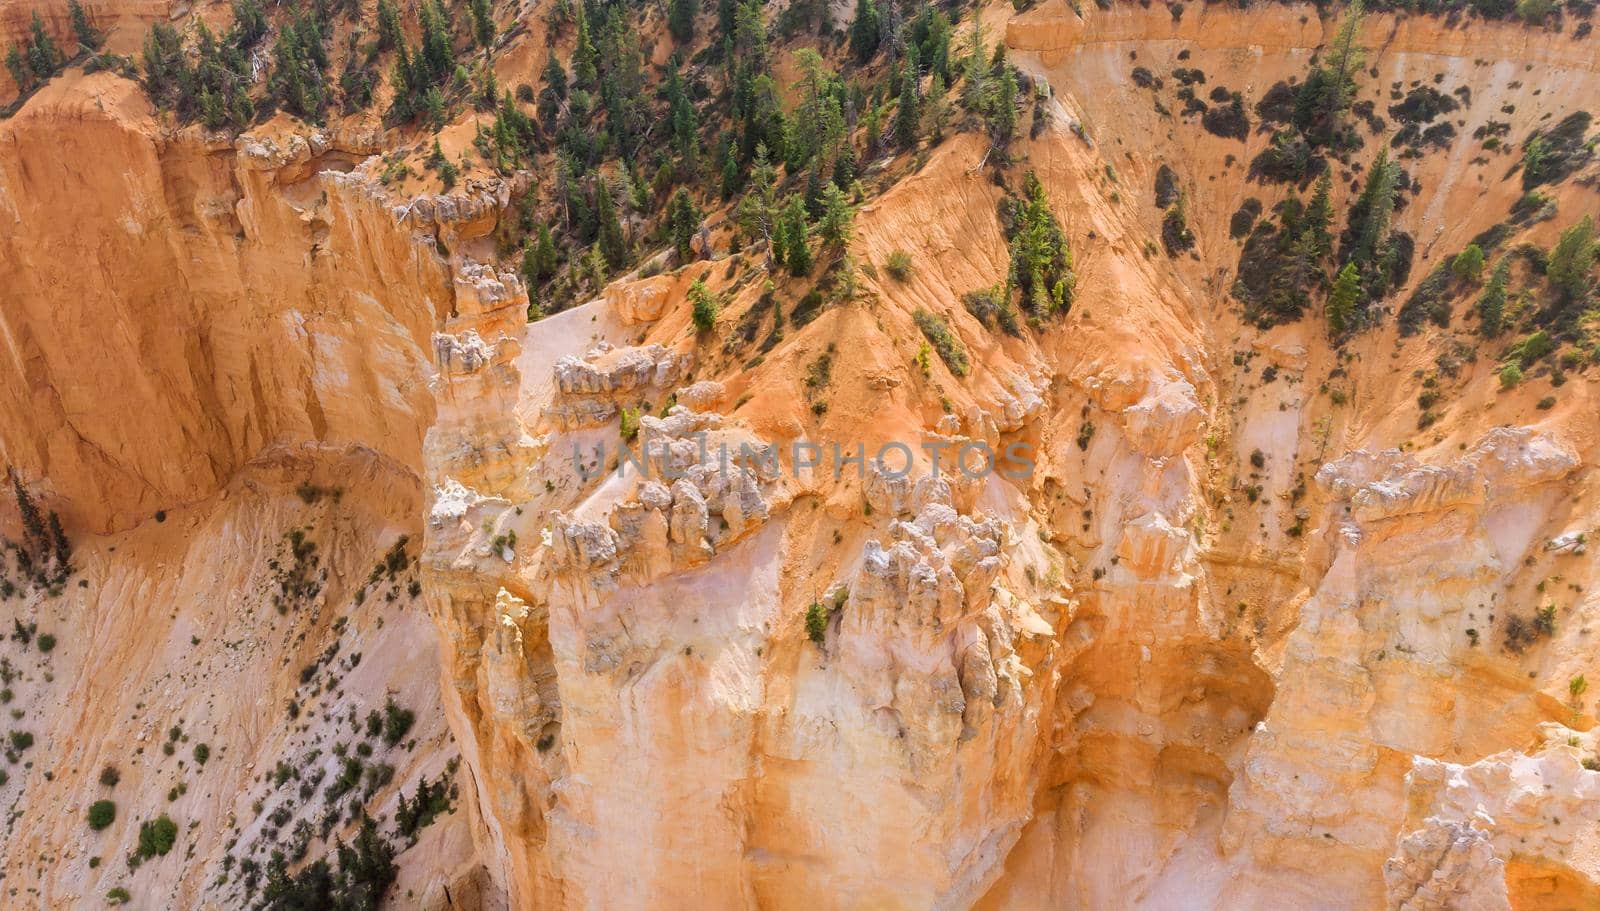 Red rock canyons outside Bryce Canyon National Park in Southern Utah by ungvar